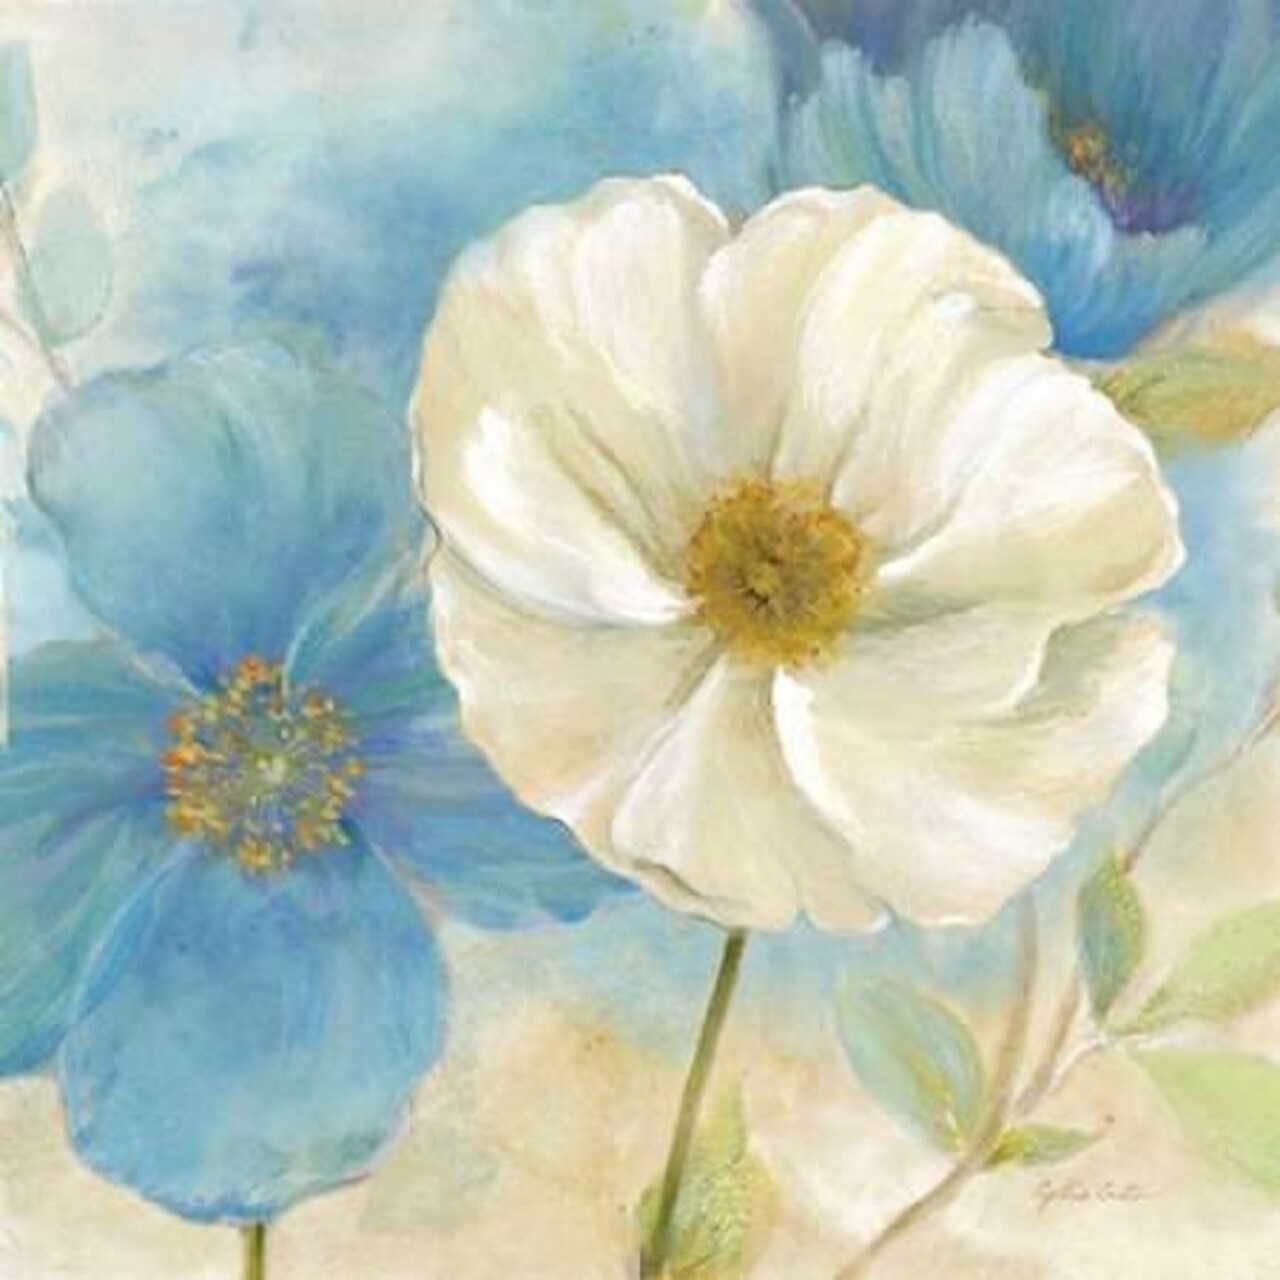 Watercolor Poppies I Poster Print by Cynthia Coulter - Item # VARPDXRB7605CC